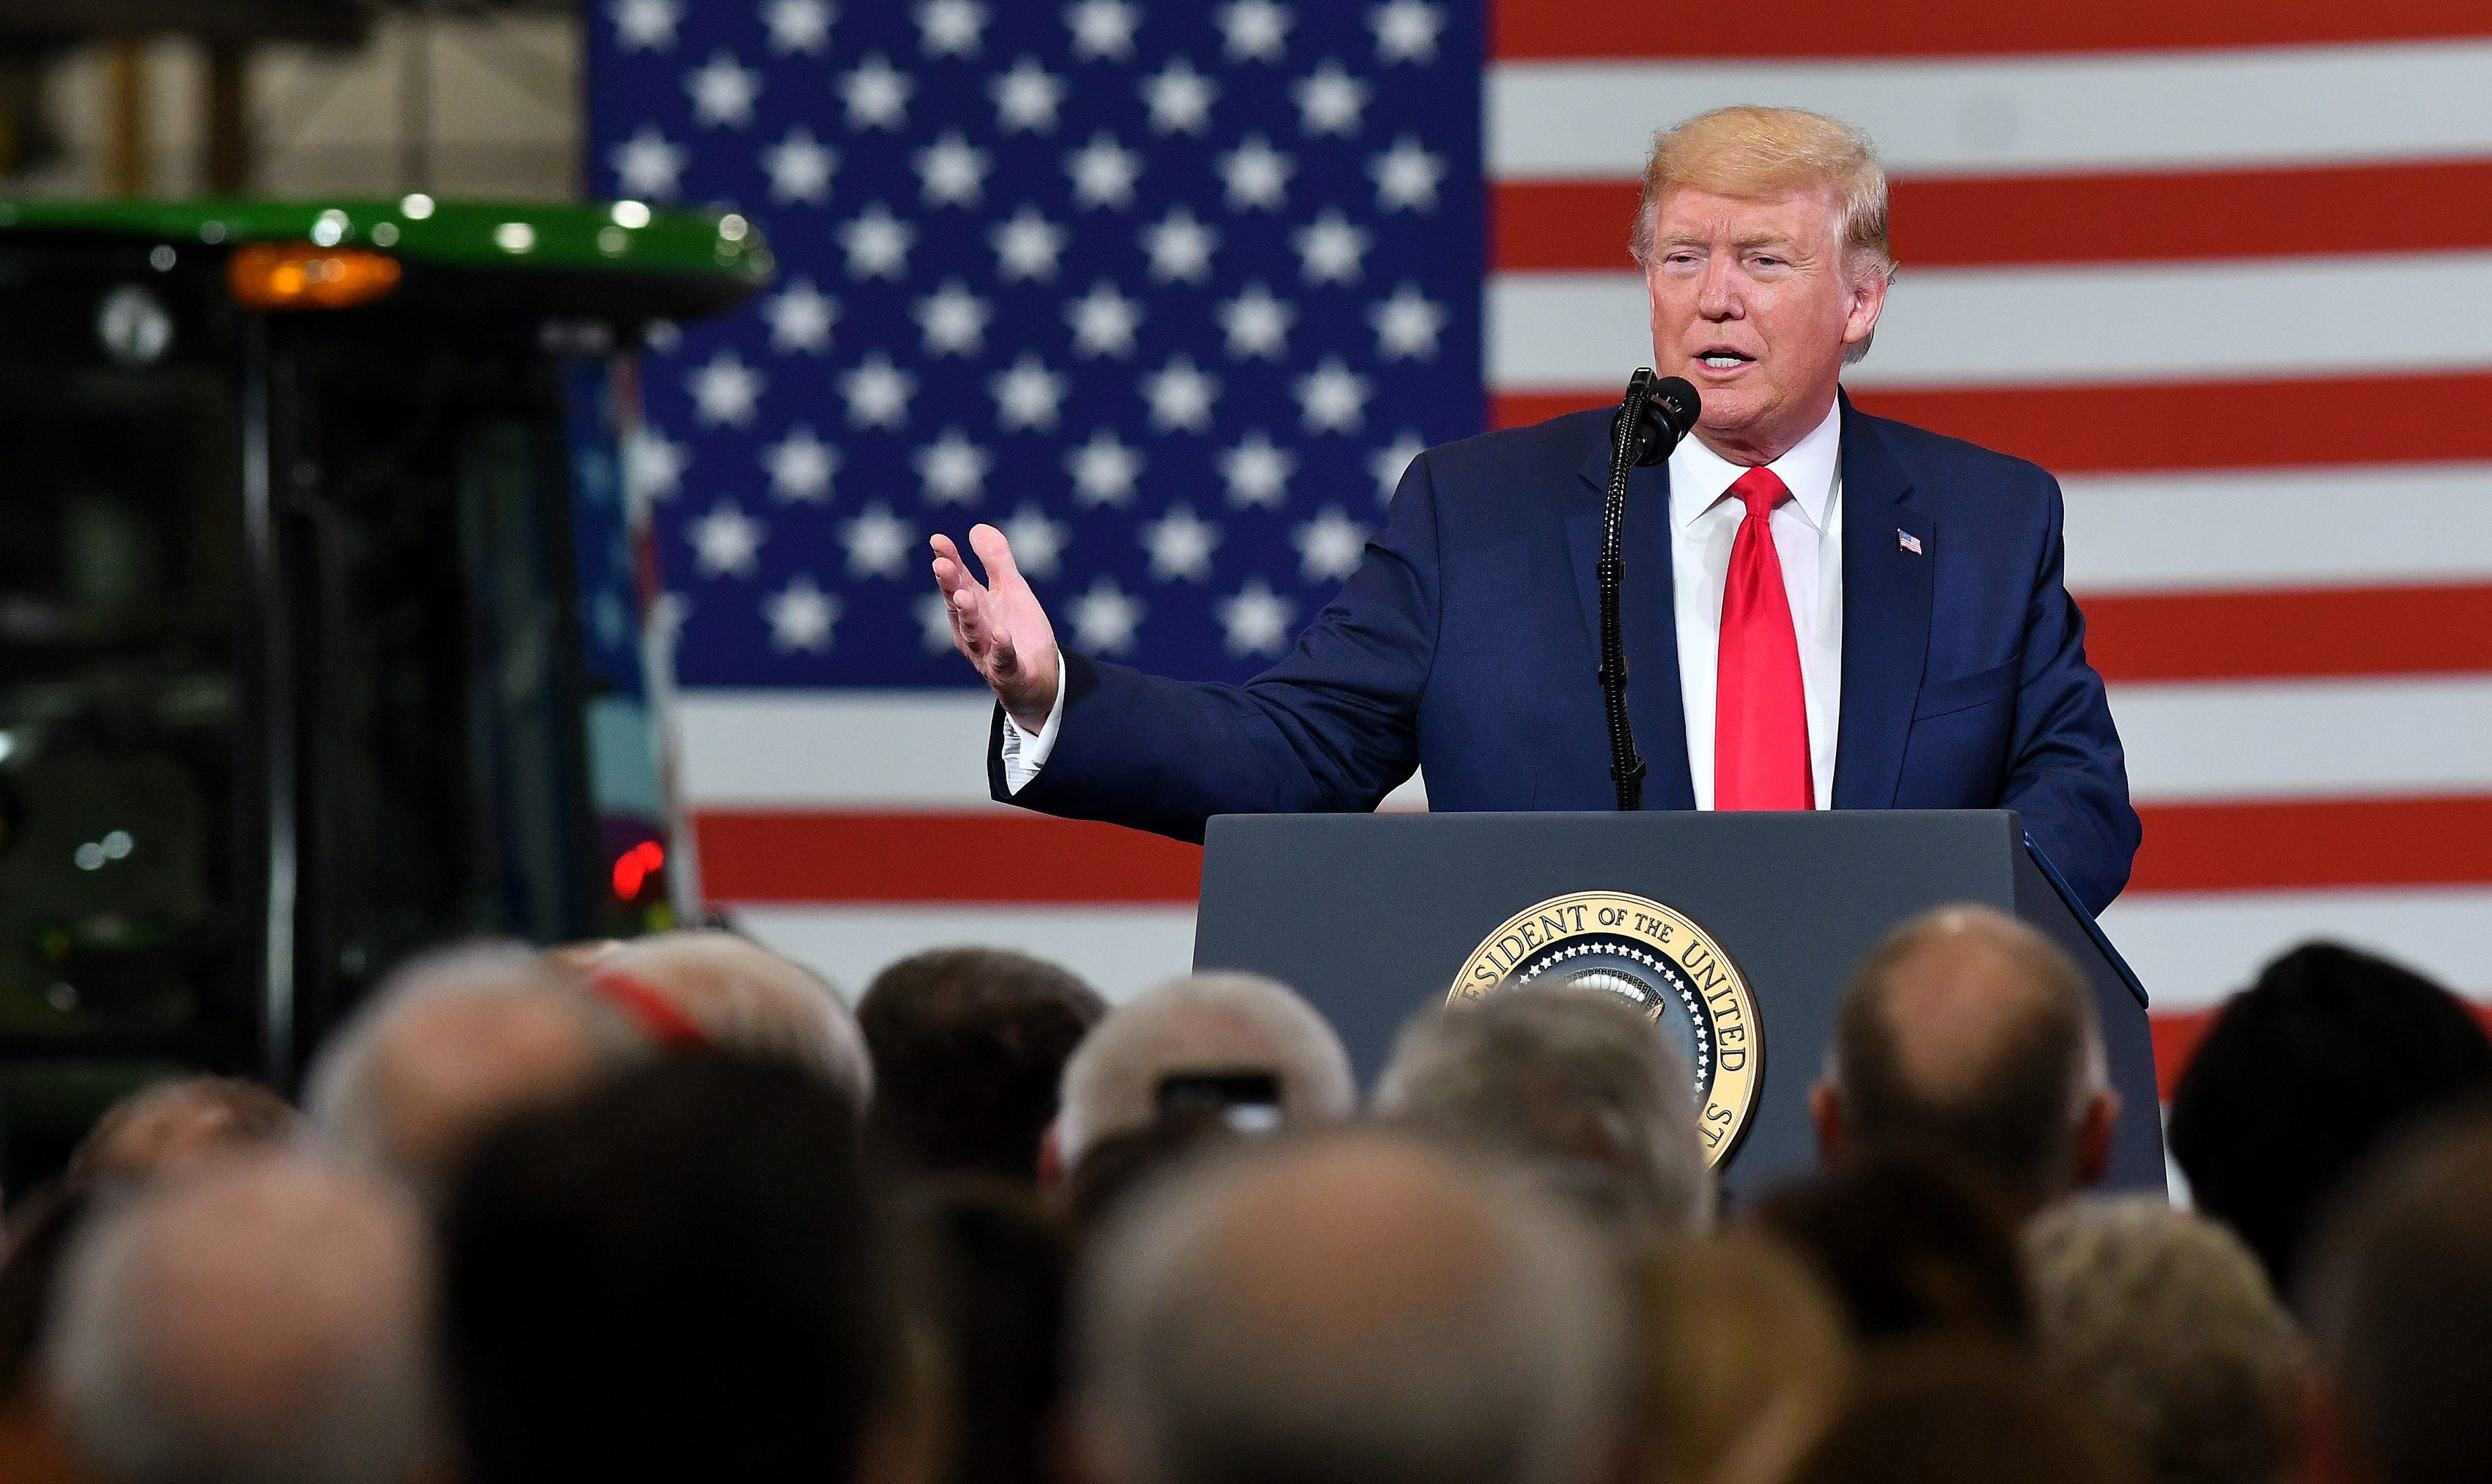 President Donald Trump gives remarks at Dana Incorporated in Warren.